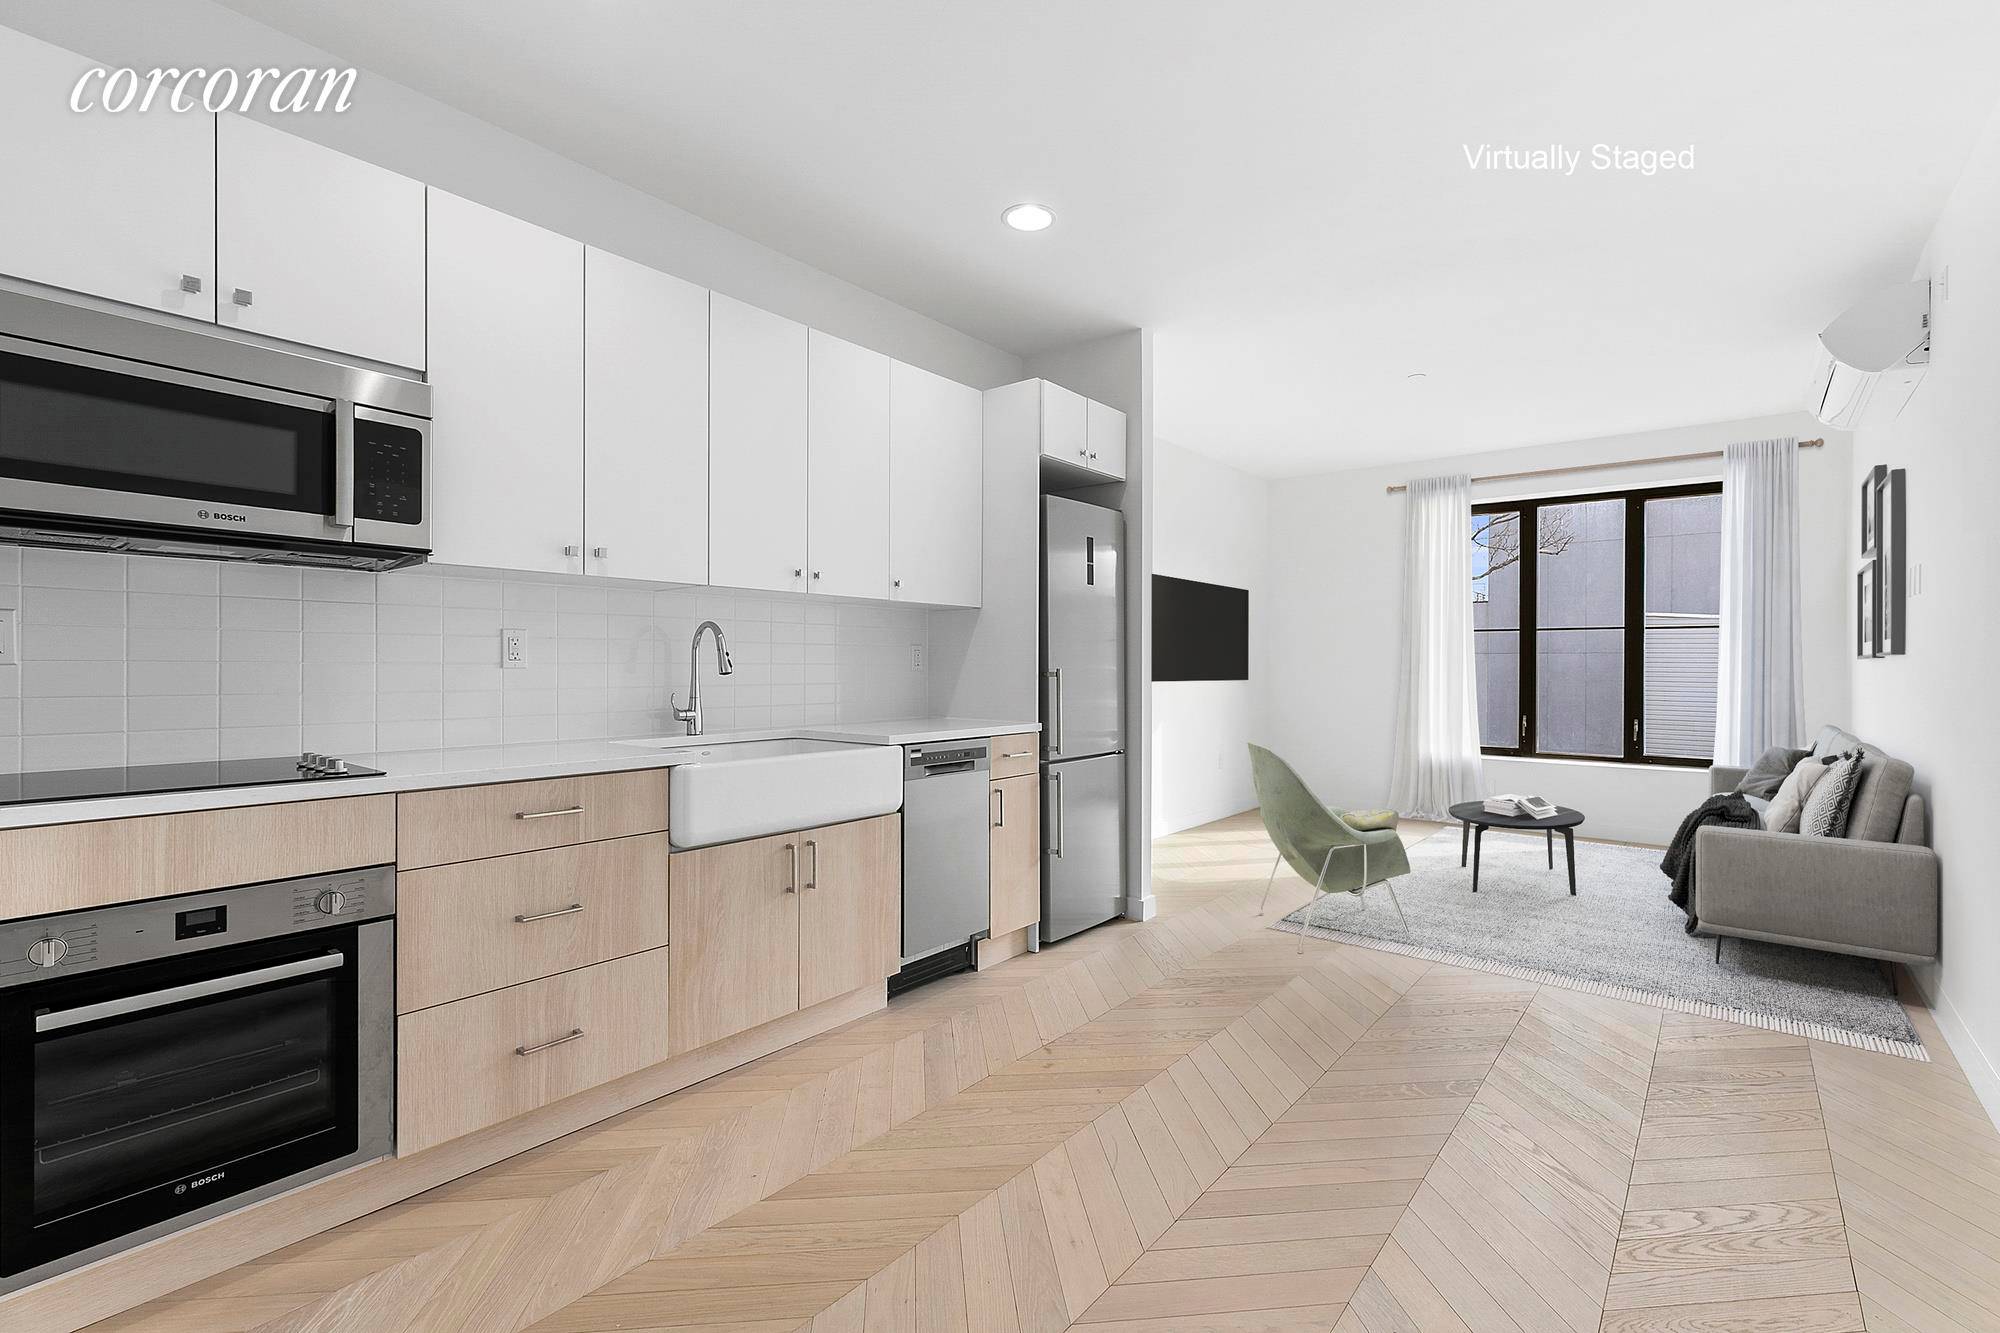 Introducing The West, a boutique new development nestled along Greenpoint, Brooklyn's bourgeoning East River Waterfront.